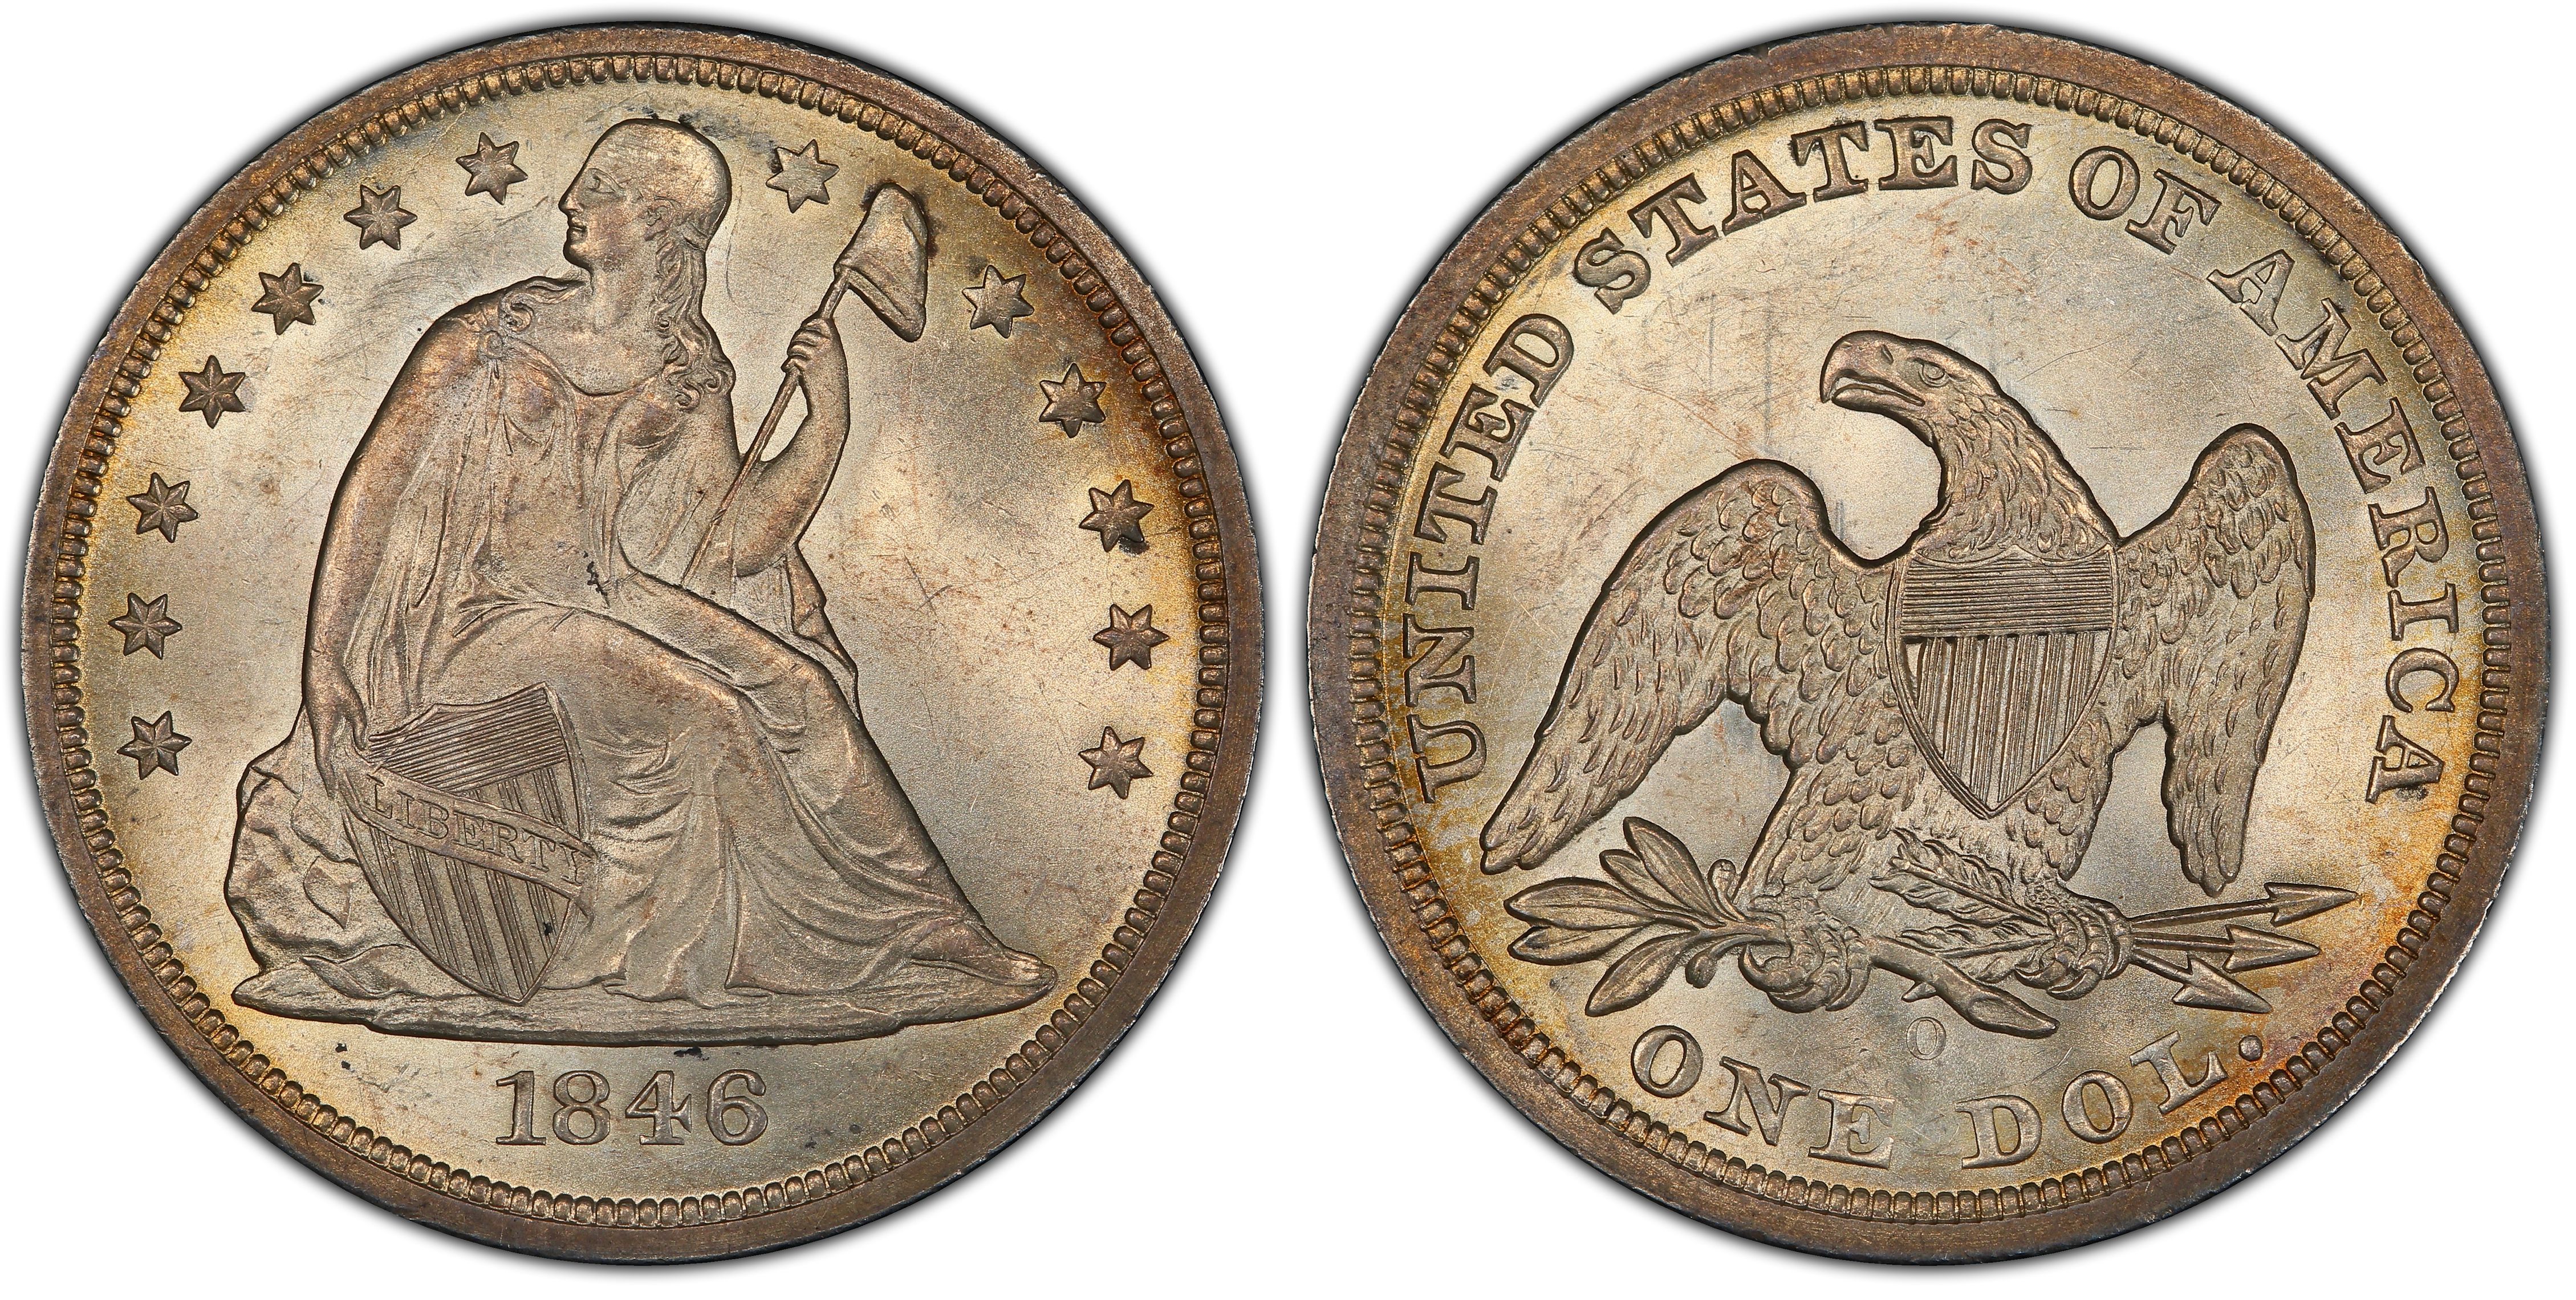 1846-O $1 (Regular Strike) Liberty Seated Dollar - PCGS CoinFacts